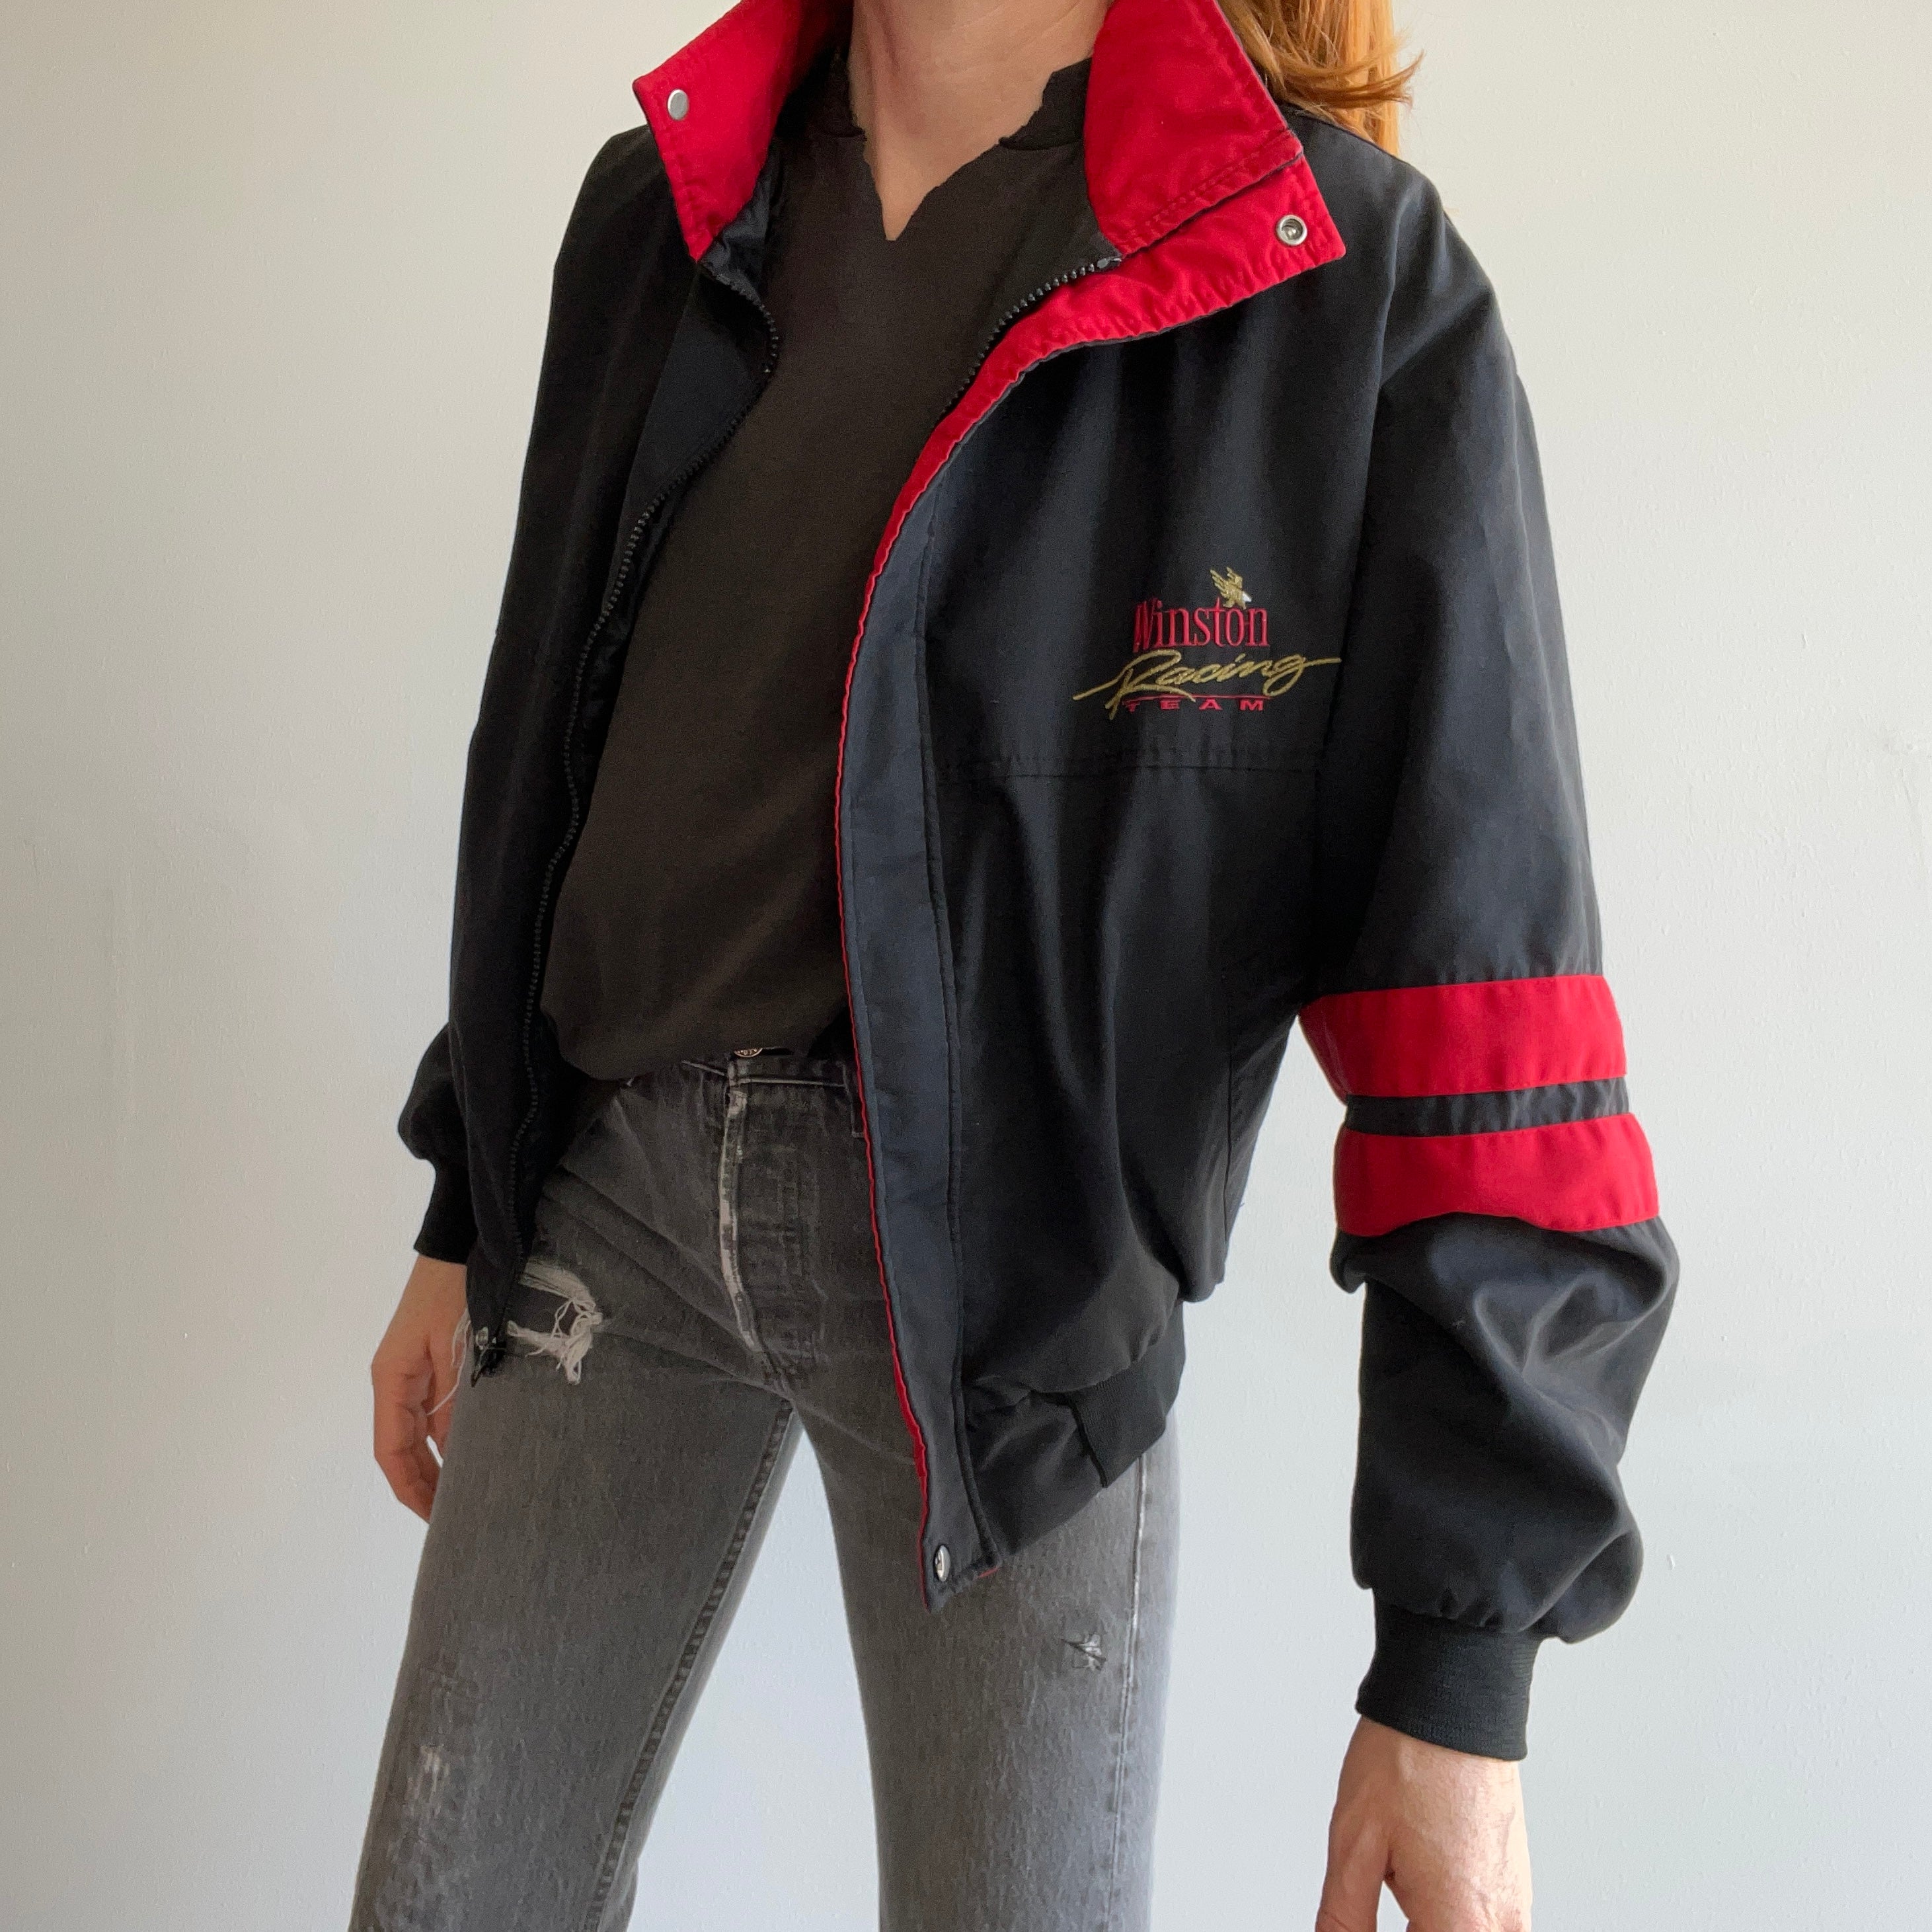 1980/90s Winston Racing Zip Up Jacket with Double Stripes